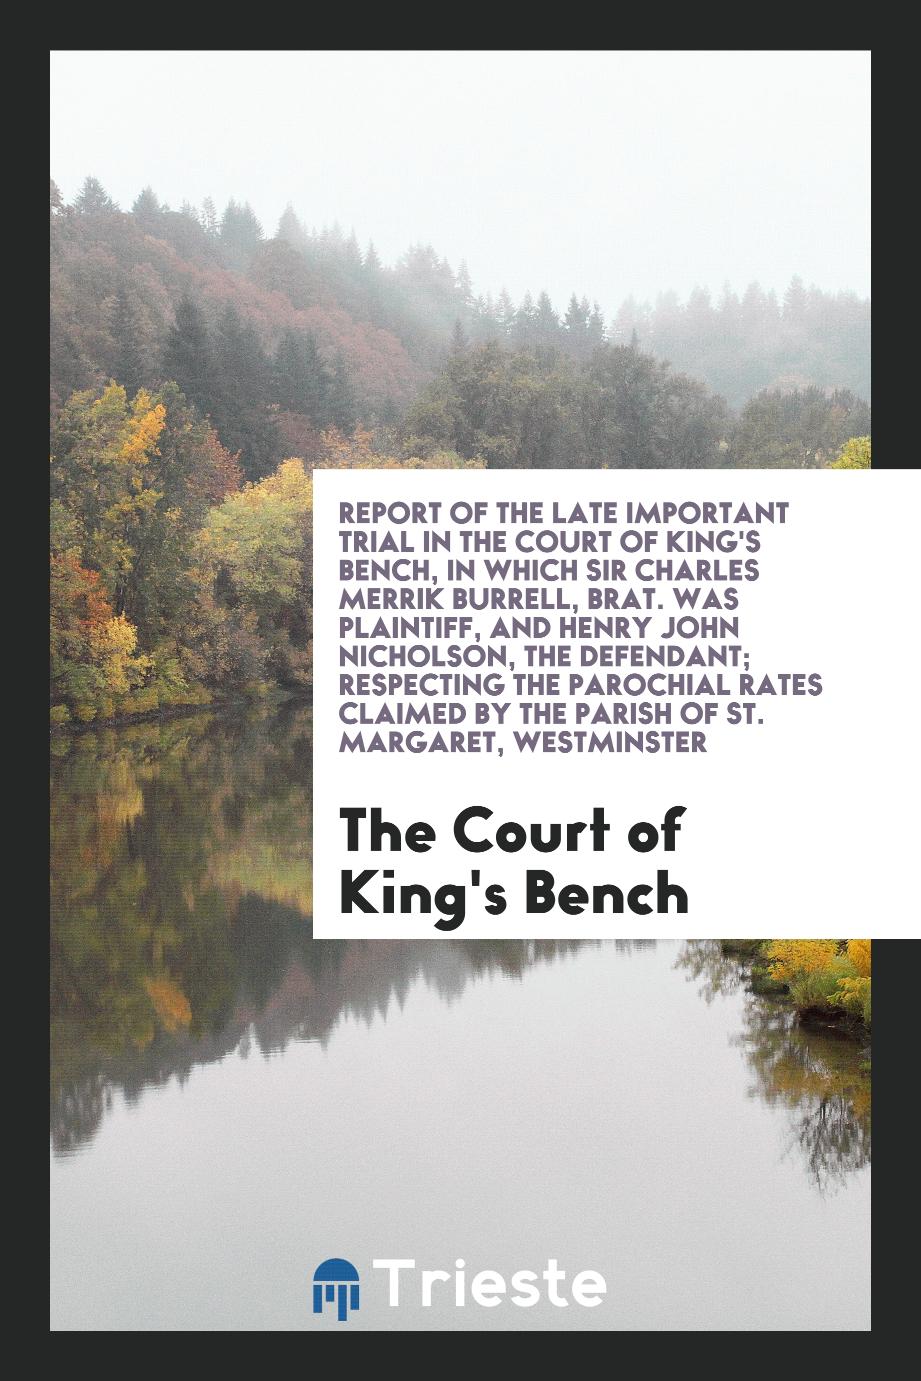 Report of the Late Important Trial in the Court of King's Bench, in Which Sir Charles Merrik Burrell, Brat. Was Plaintiff, and Henry John Nicholson, the Defendant; Respecting the Parochial Rates Claimed by the Parish of St. Margaret, Westminster